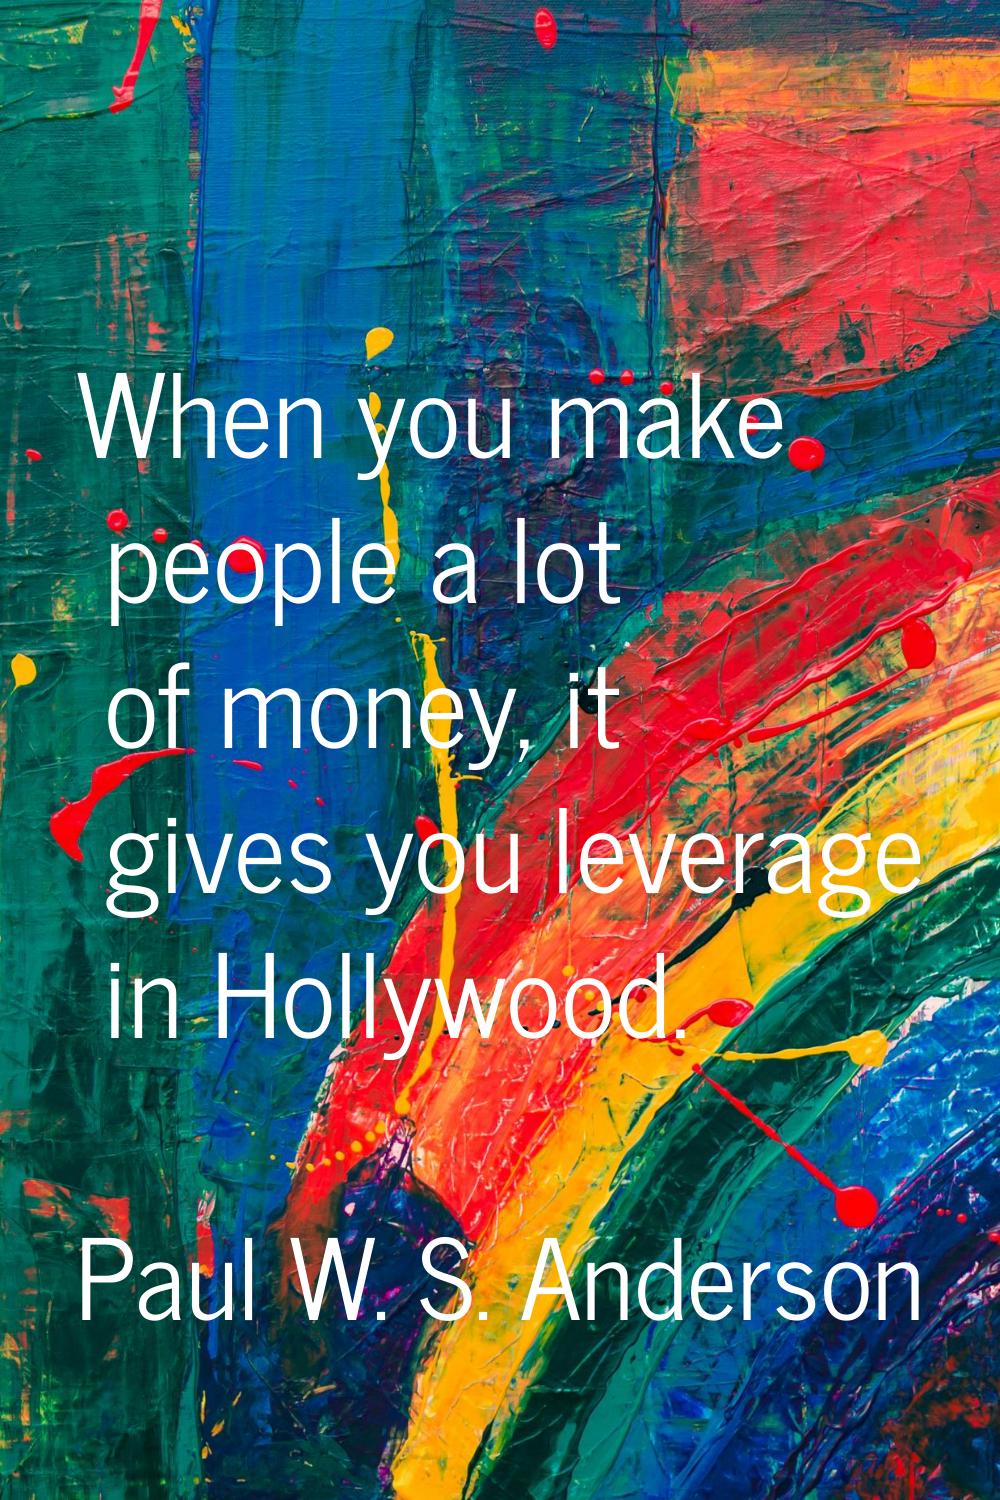 When you make people a lot of money, it gives you leverage in Hollywood.